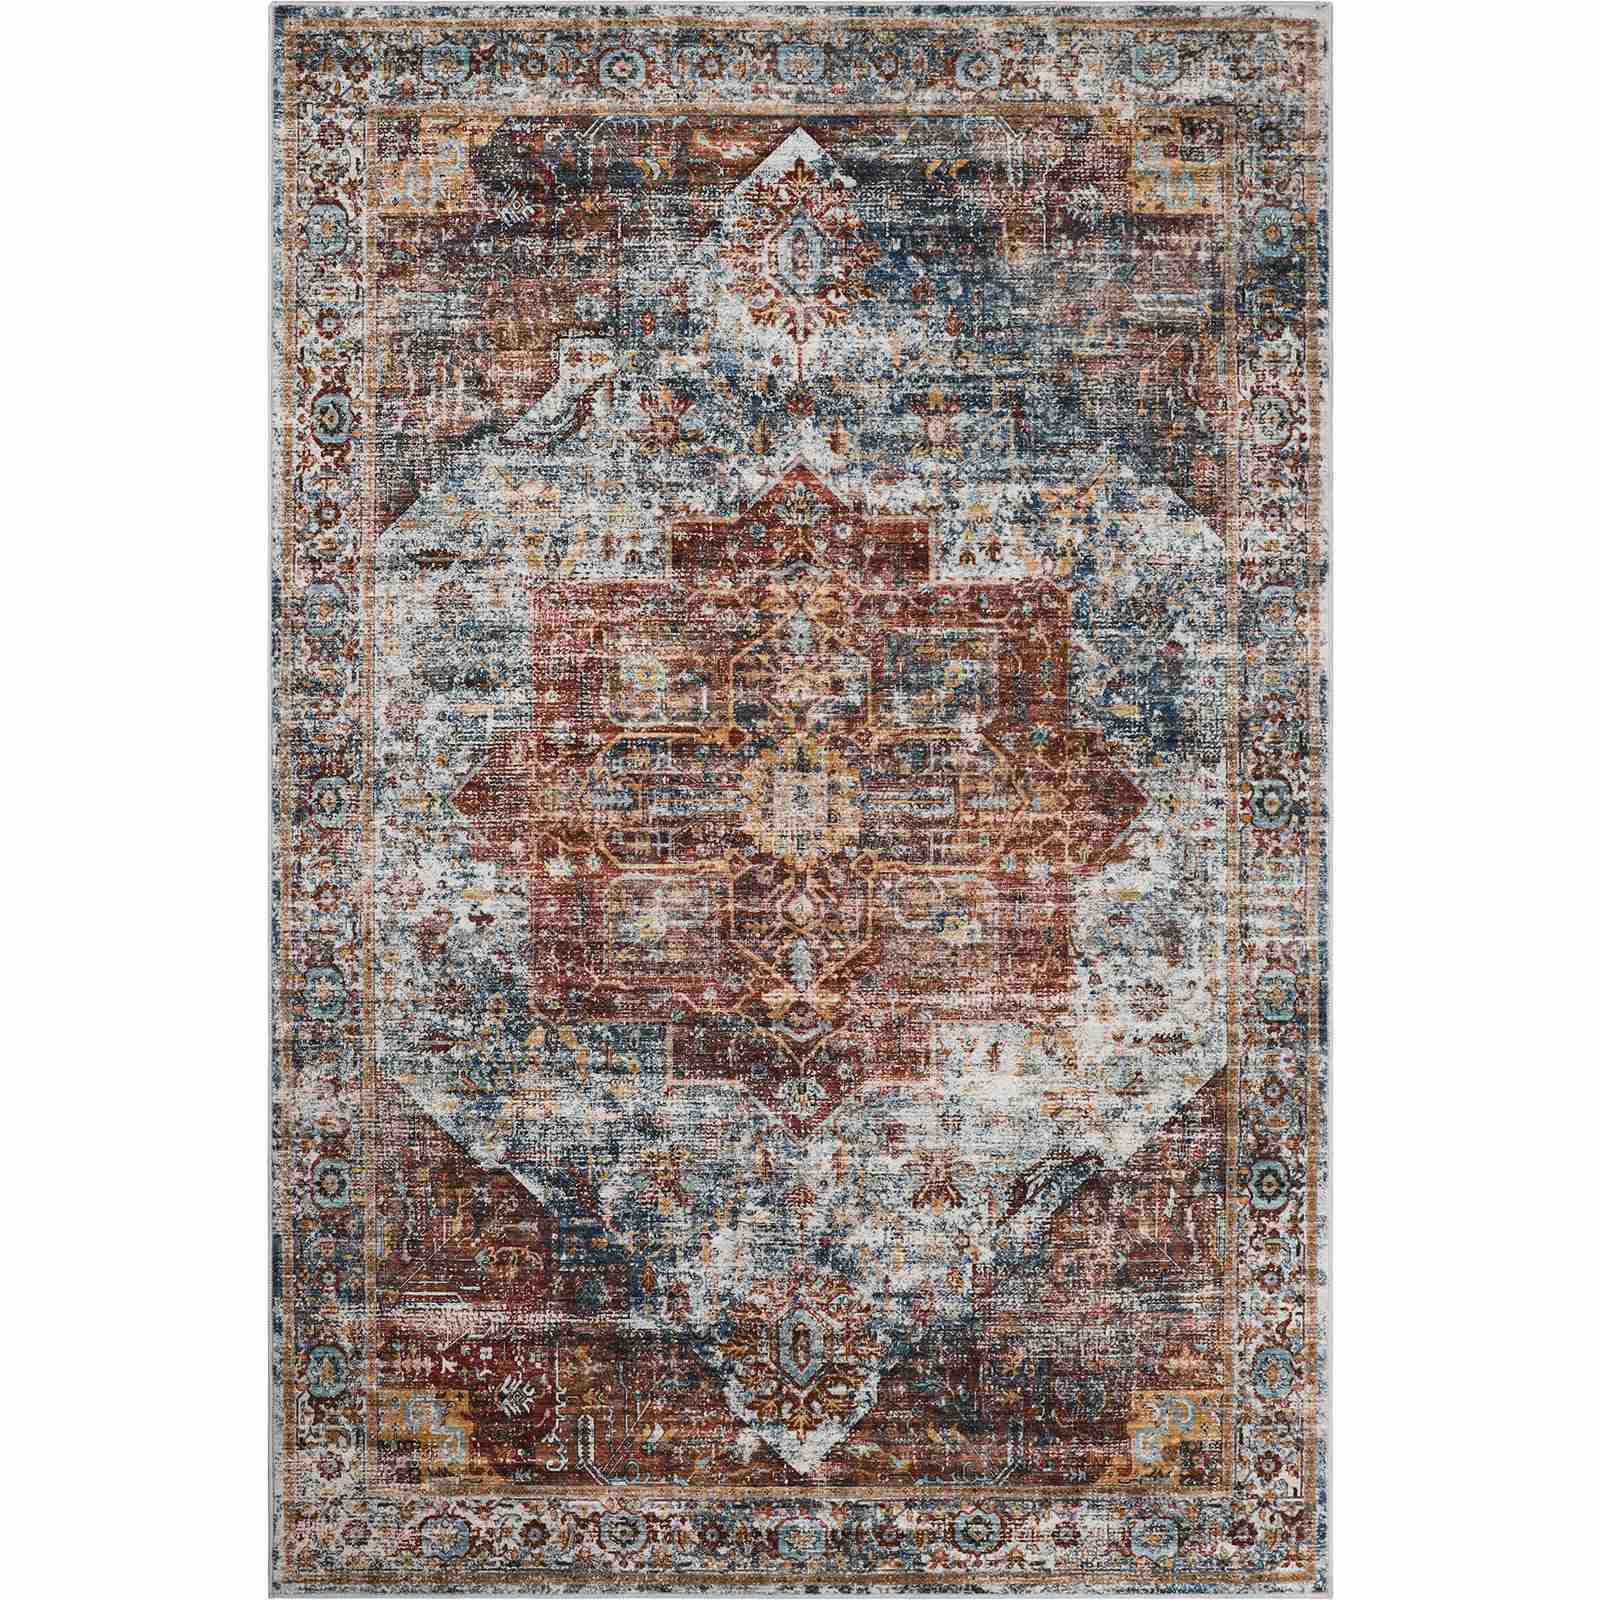 ComiComi Washable  Patterned Rugs Keyvan Red